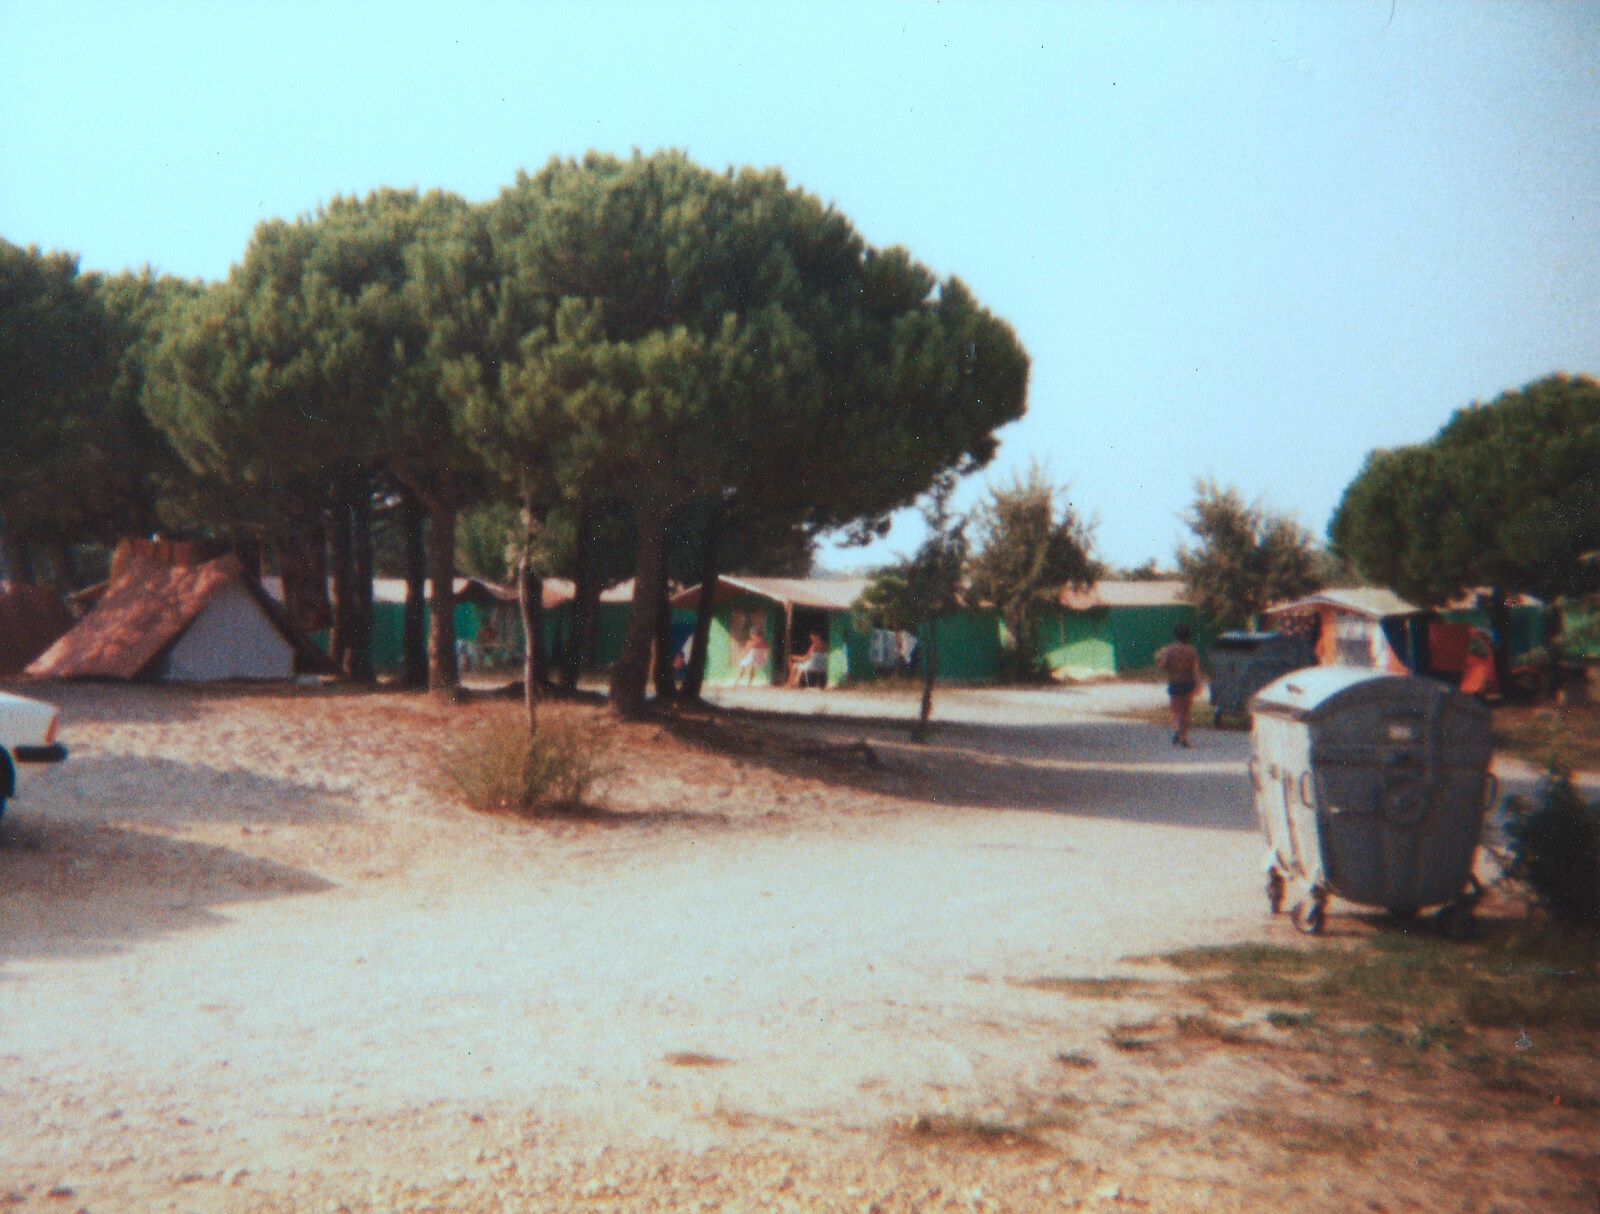 The Camargue camp site from Camping with Sean, The Camargue, South of France, 15th July 1982